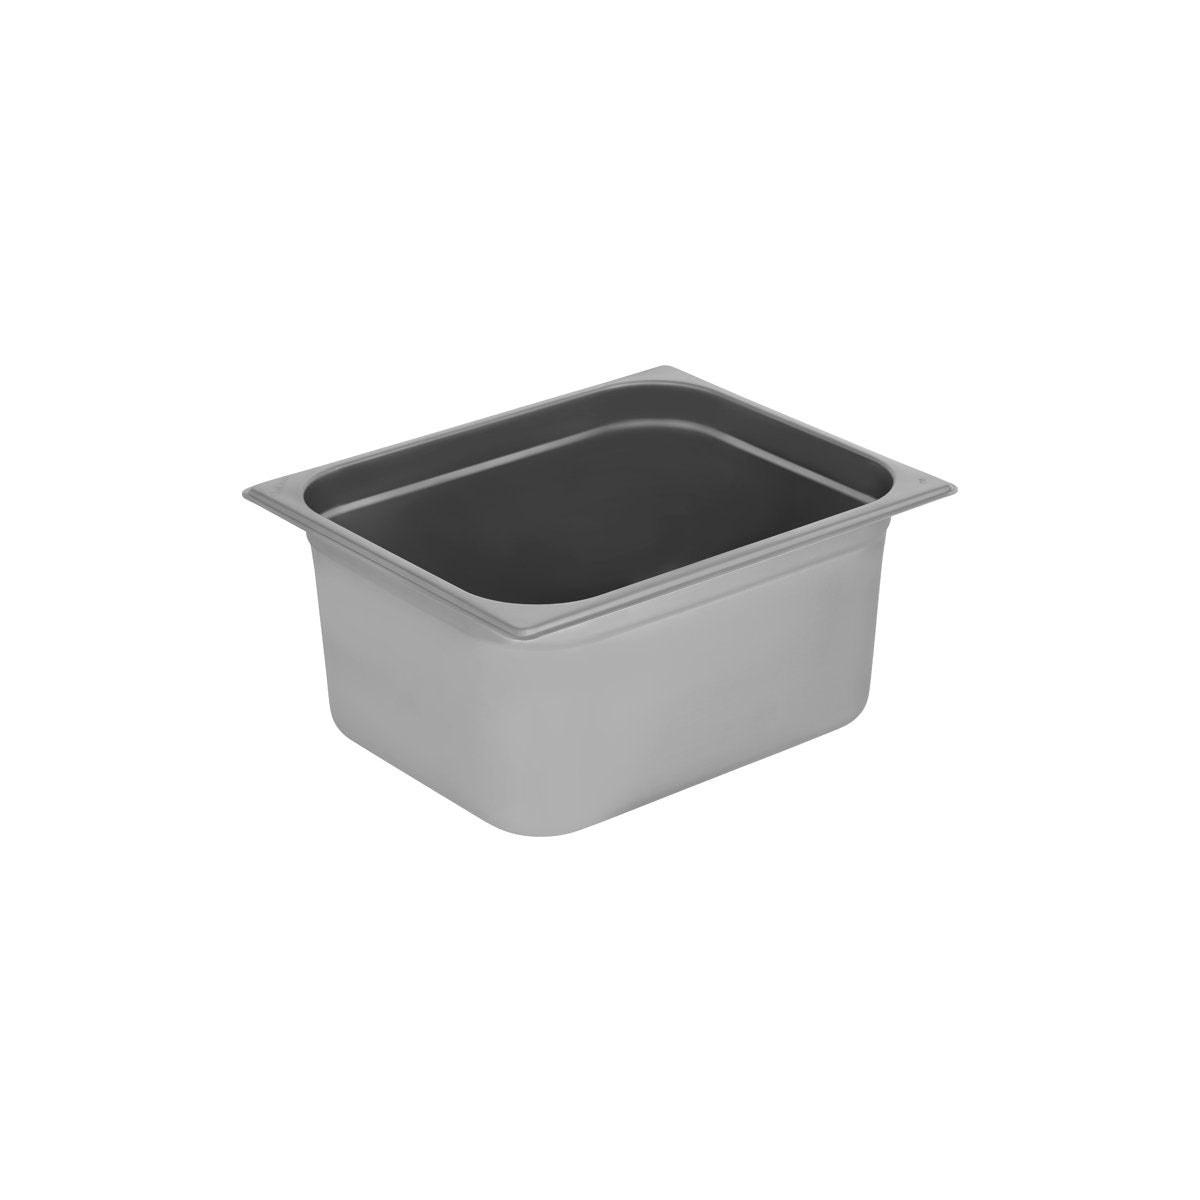 GN-12150 Chef Inox Gastronorm Pan 1/2 Size 150mm Tomkin Australia Hospitality Supplies